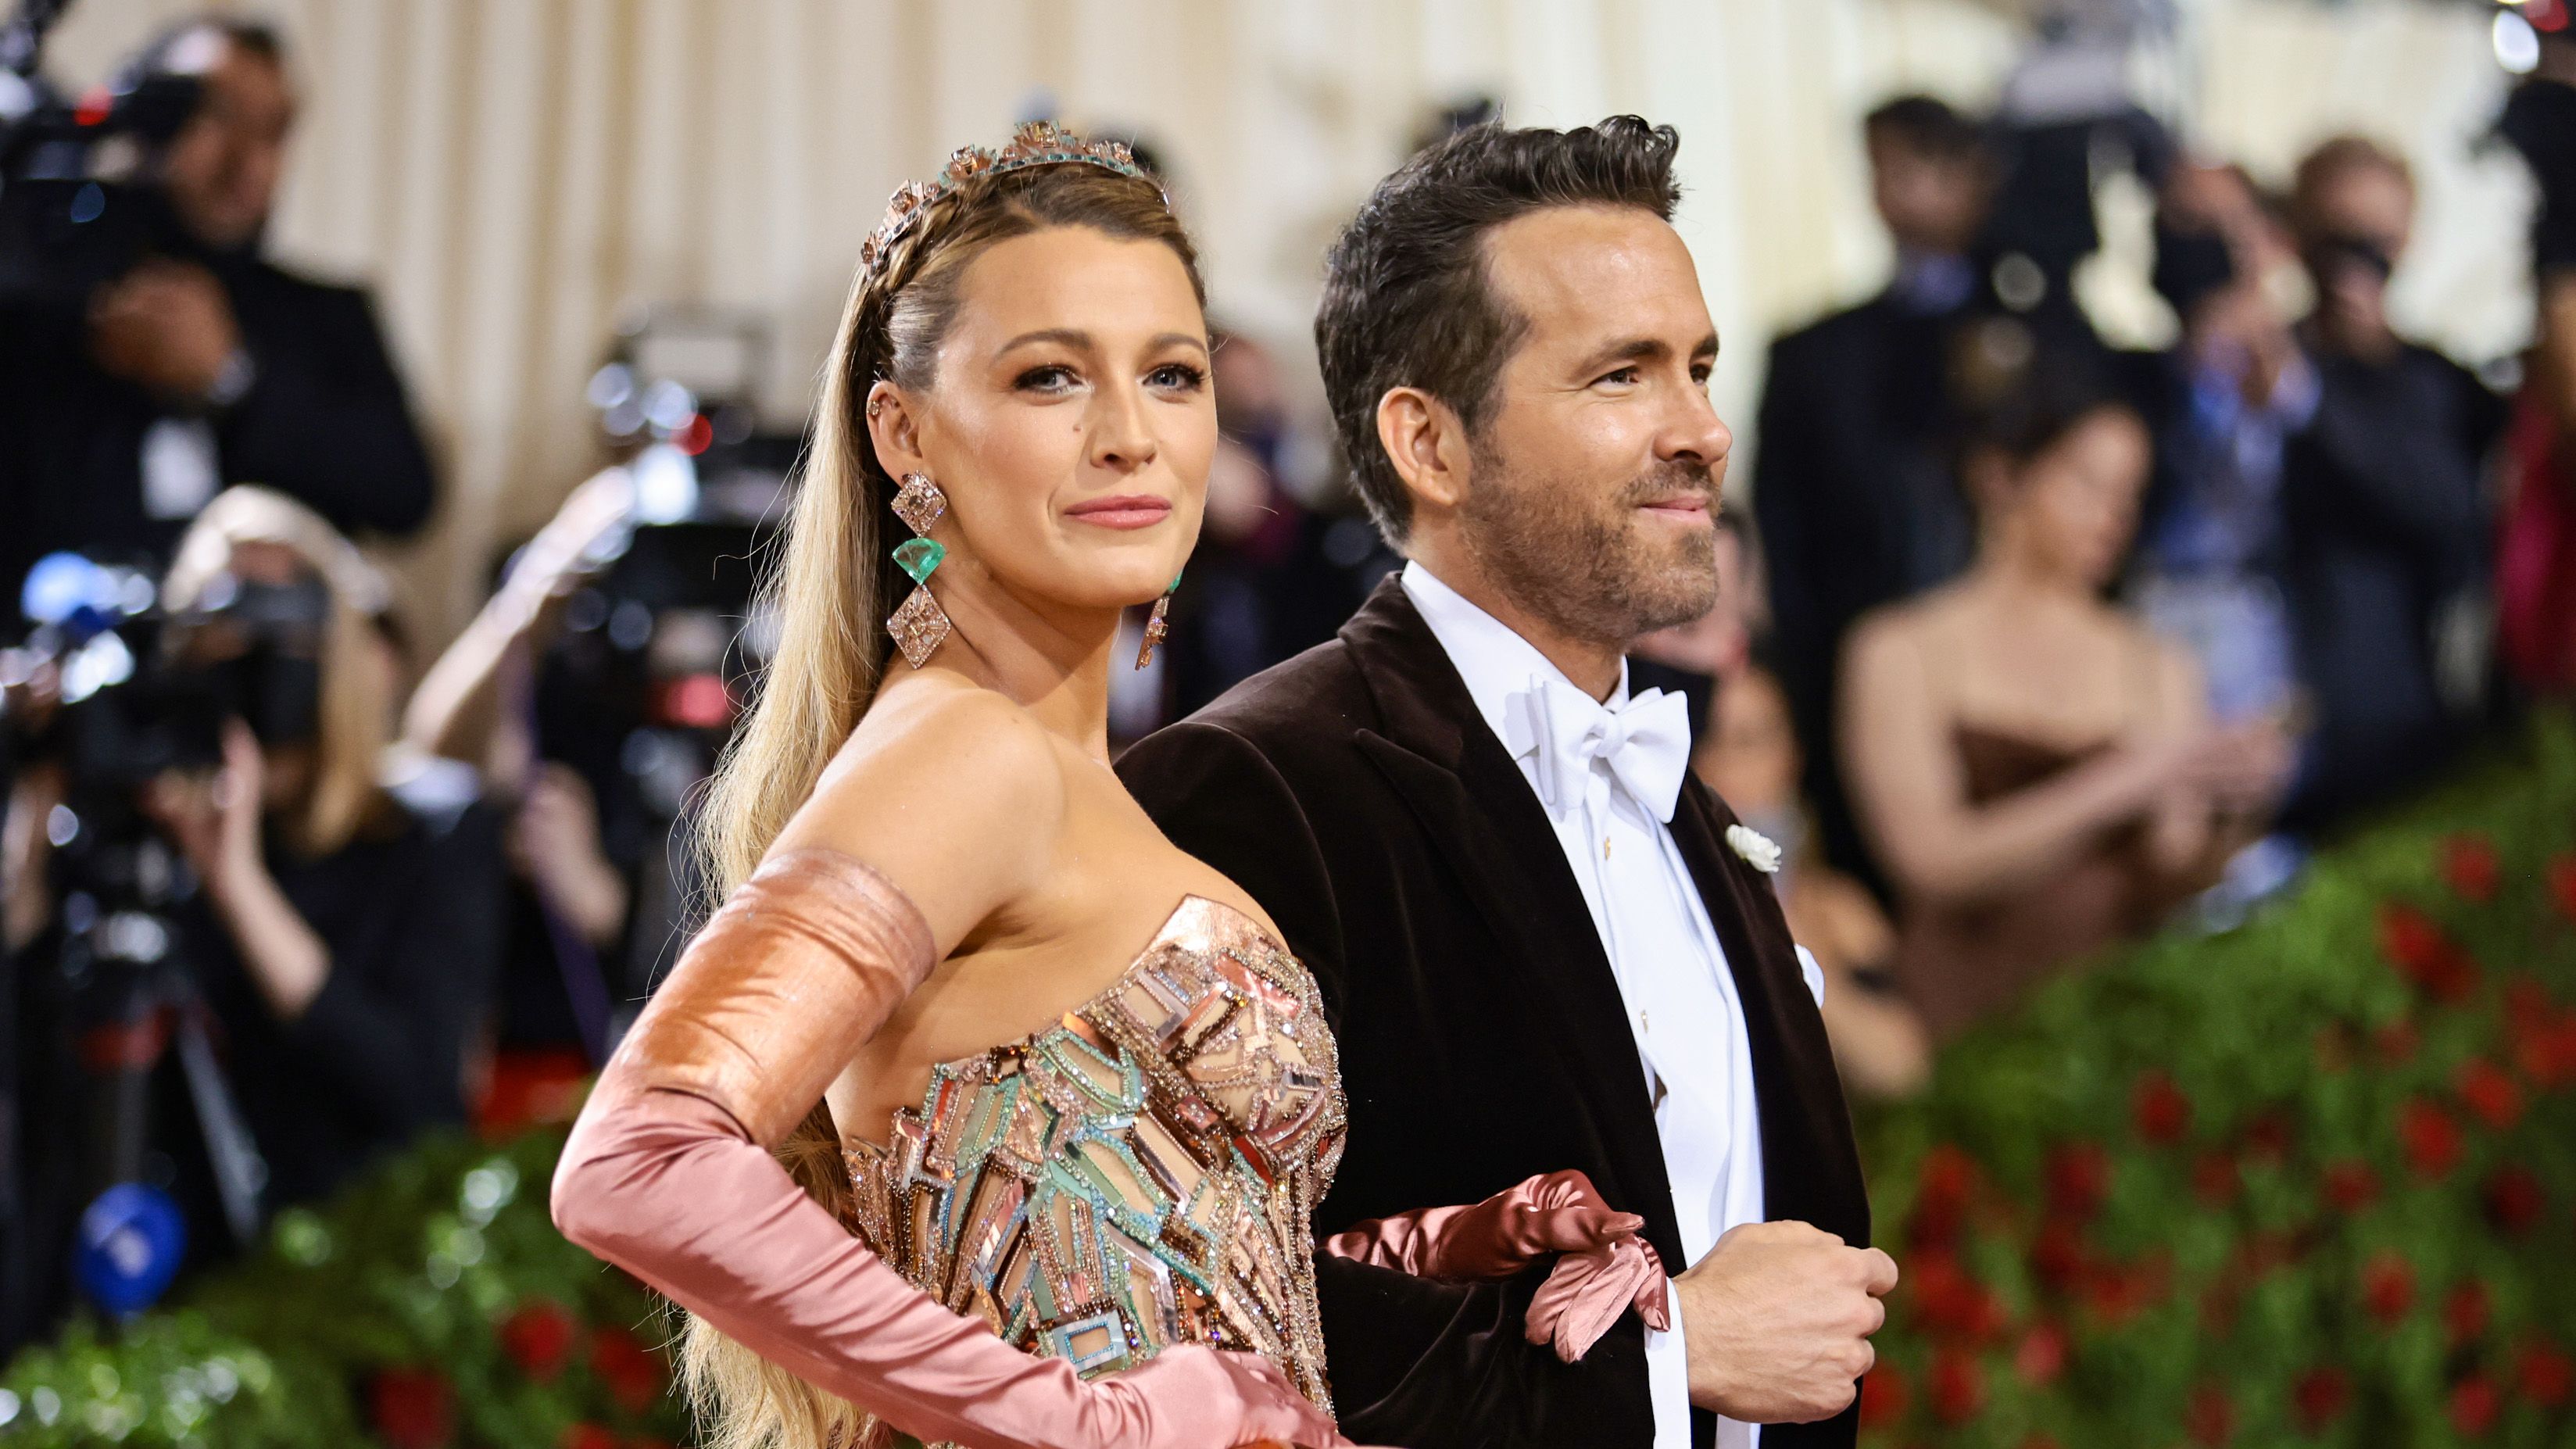 Blake Lively reveals what she was doing during the Met Gala - ABC News